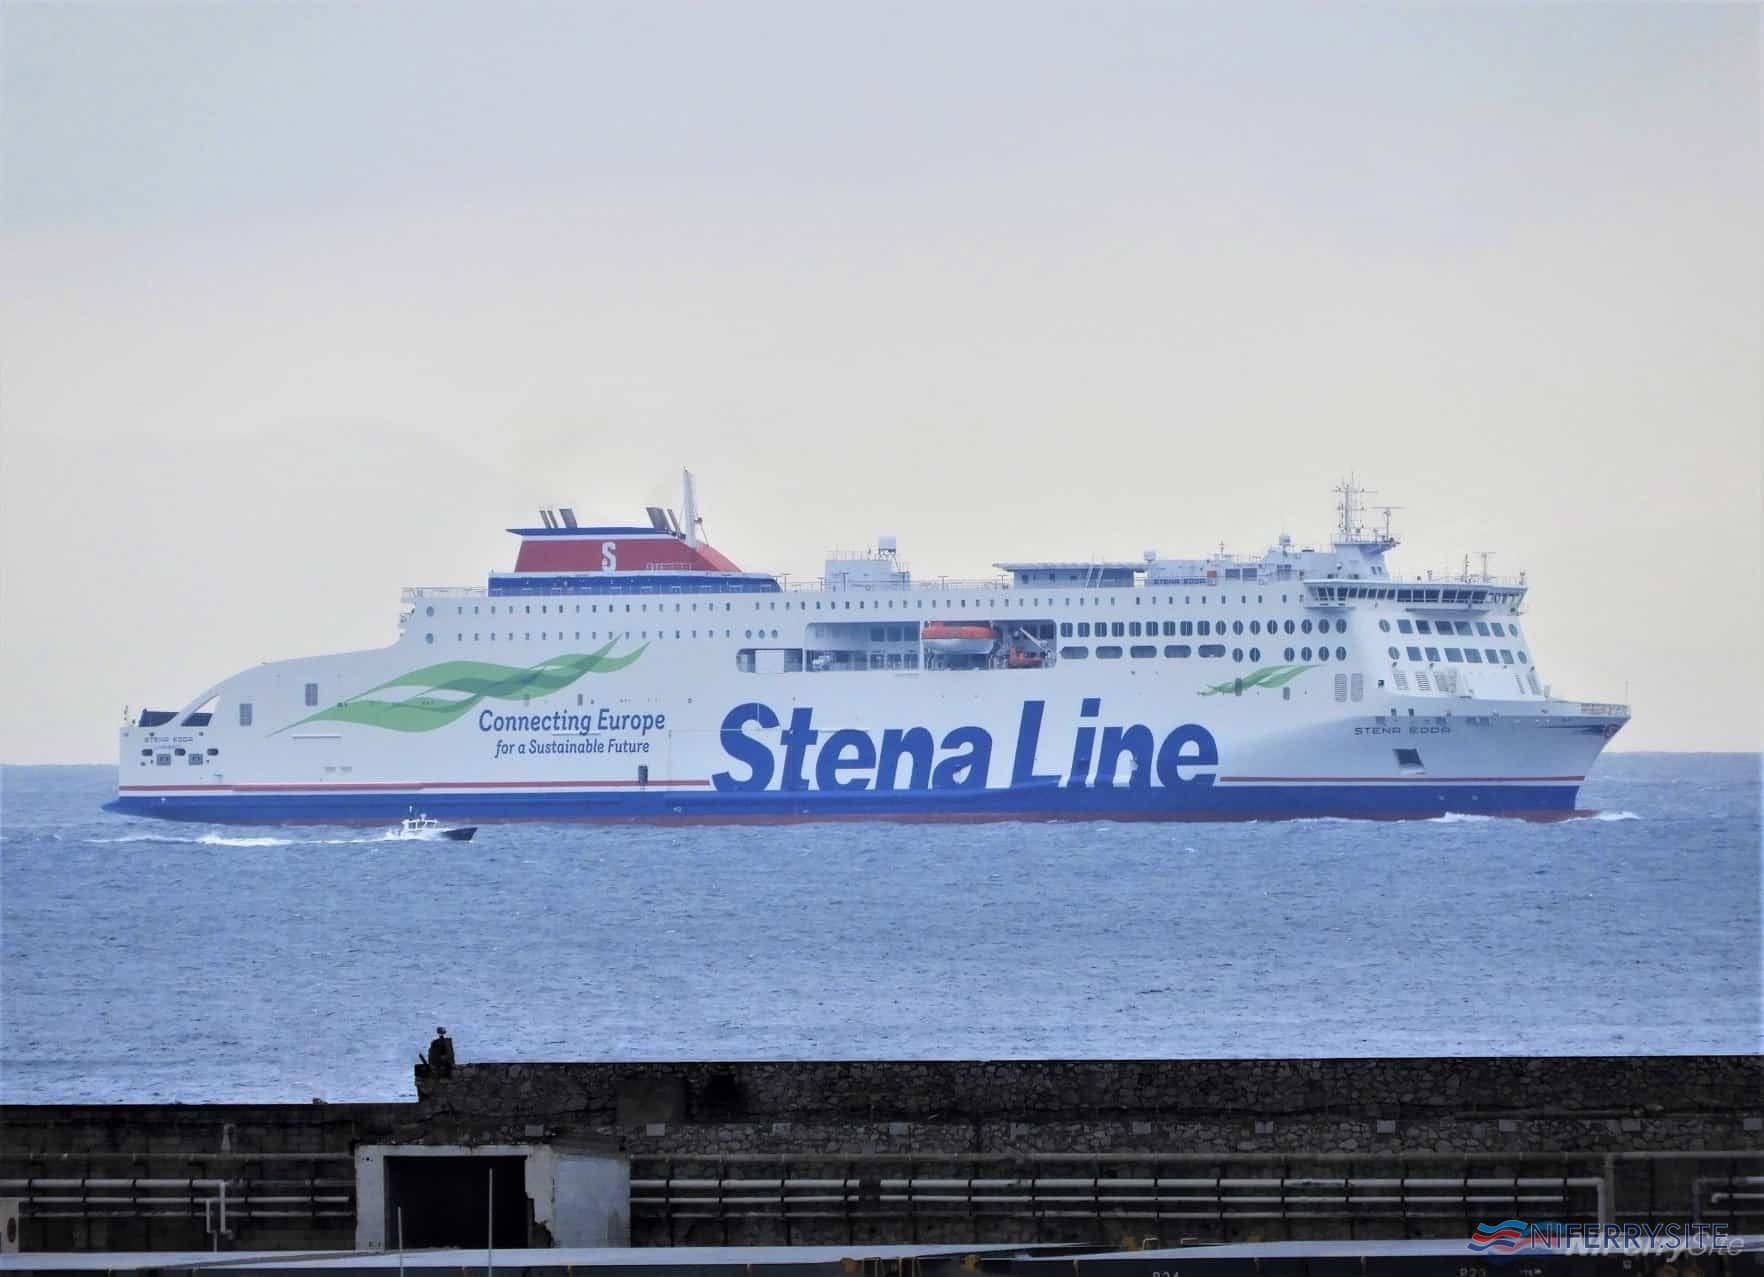 STENA EDDA in the Bay of Gibraltar ahead of her first arrival in Europe at Algeciras Anchorage, 20.02.2020. The stop was to take on bunkers and supplies prior to proceeding to the U.K. on the final leg of her 10,000+ mile journey. Copyright © Tony Davis.